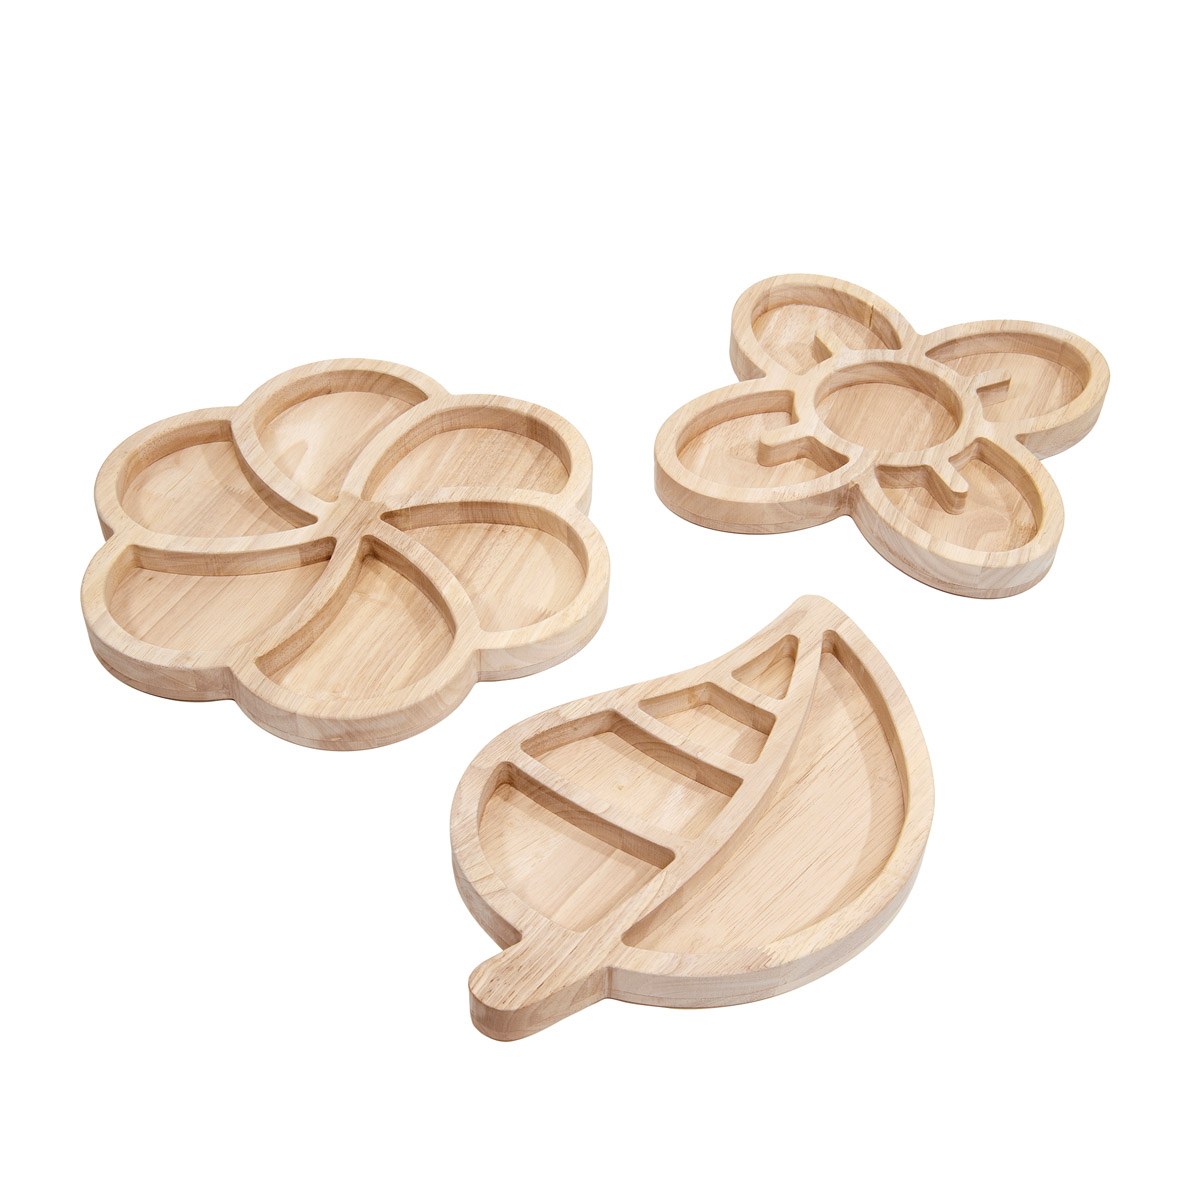 Kaplan Early Learning Company Loose Parts Organic Wooden Trays - Set of 3